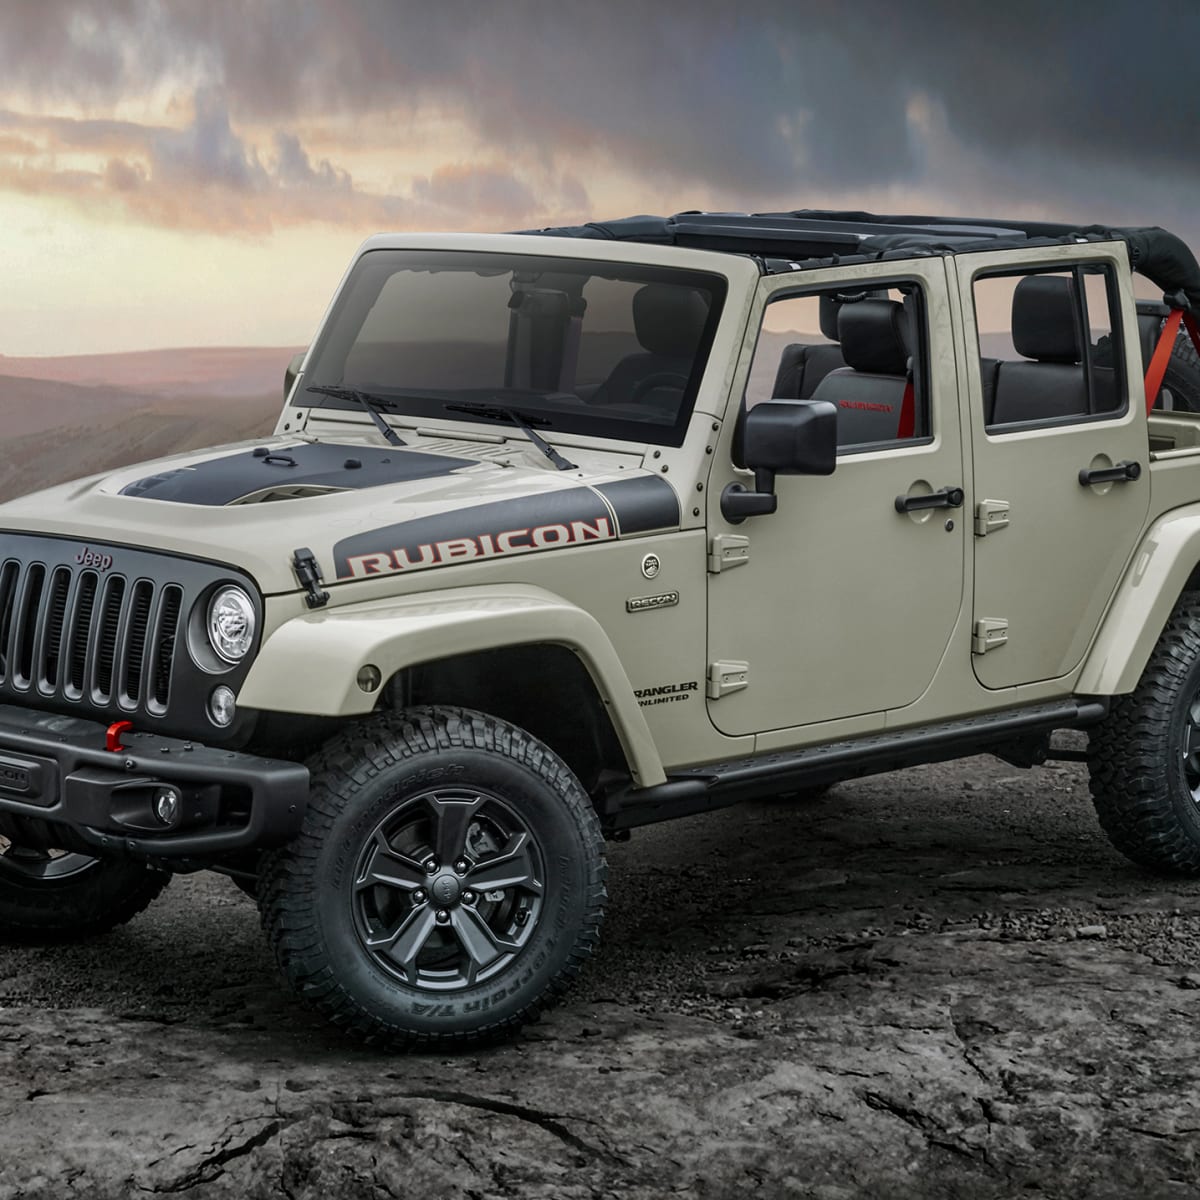 Jeep just built one of its most off-road capable Wranglers yet - Acquire